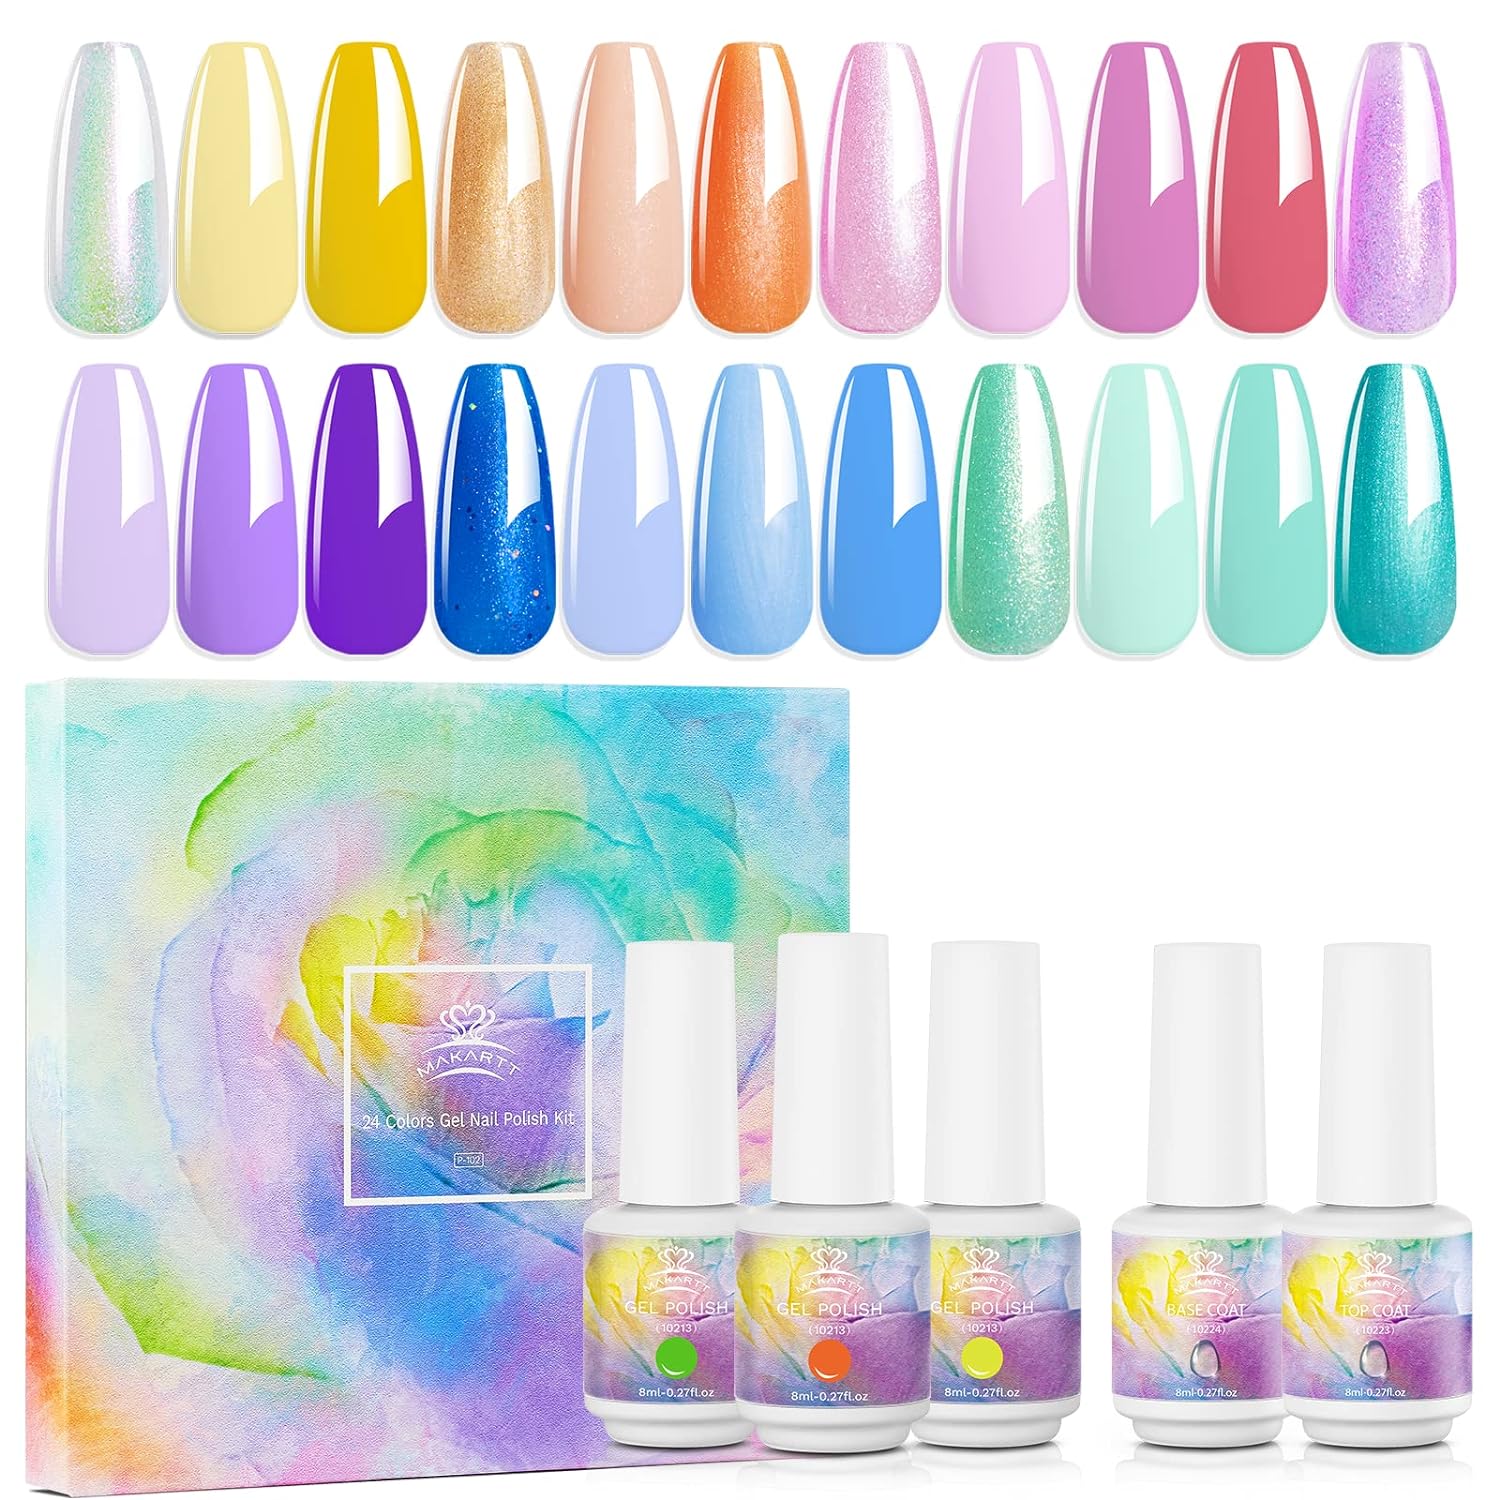 Mermaid Collections Gel Nail Polish with Base and Top Coat, 22 Colors Gel Polish Set (8ml/Each)